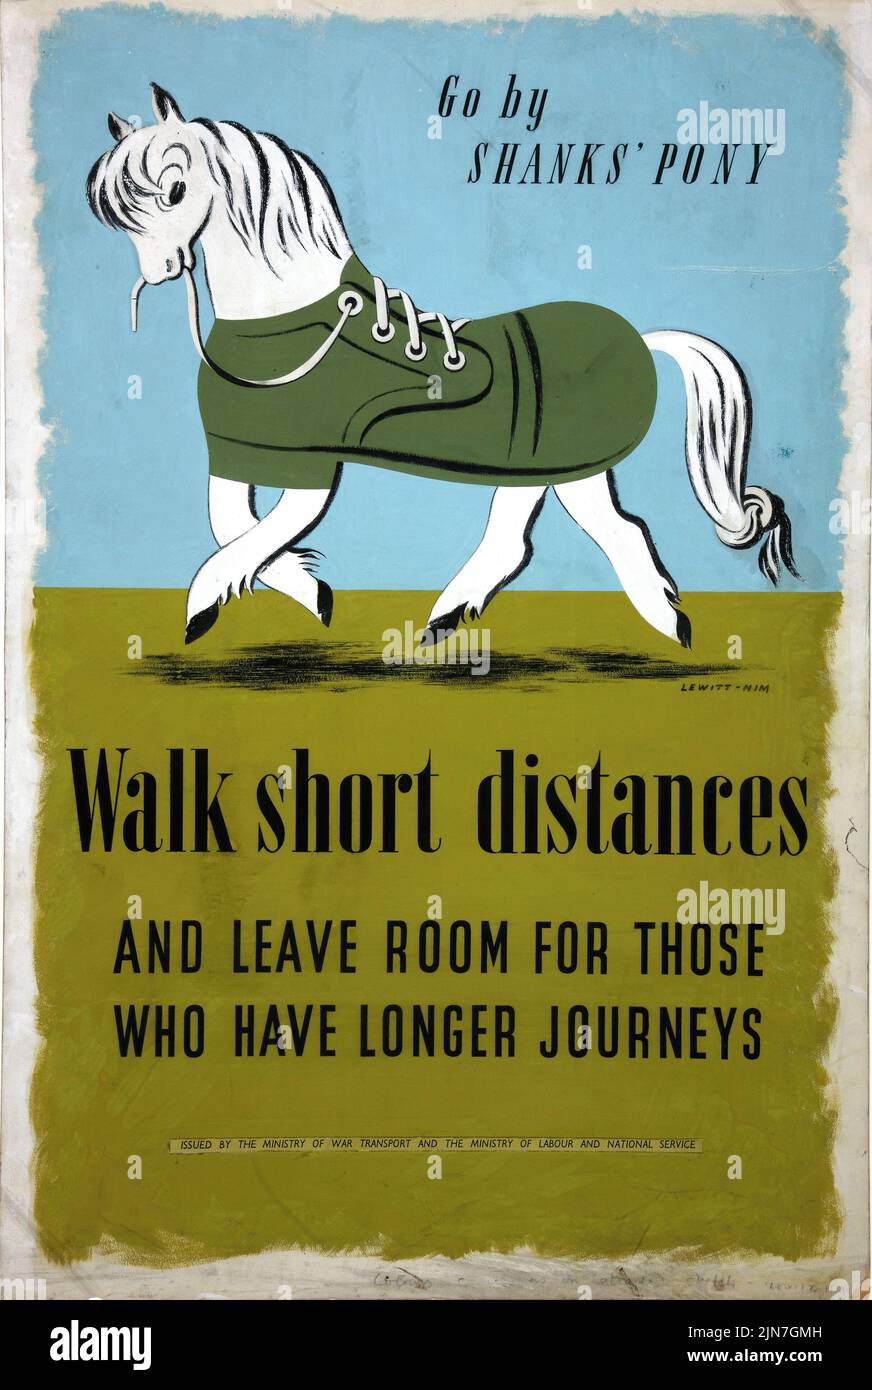 Go by Shanks’ Pony. Walk short distances and leave room for those who have longer journeys (1939 - 1946) British World War II era poster by Jan Le Witt Stock Photo